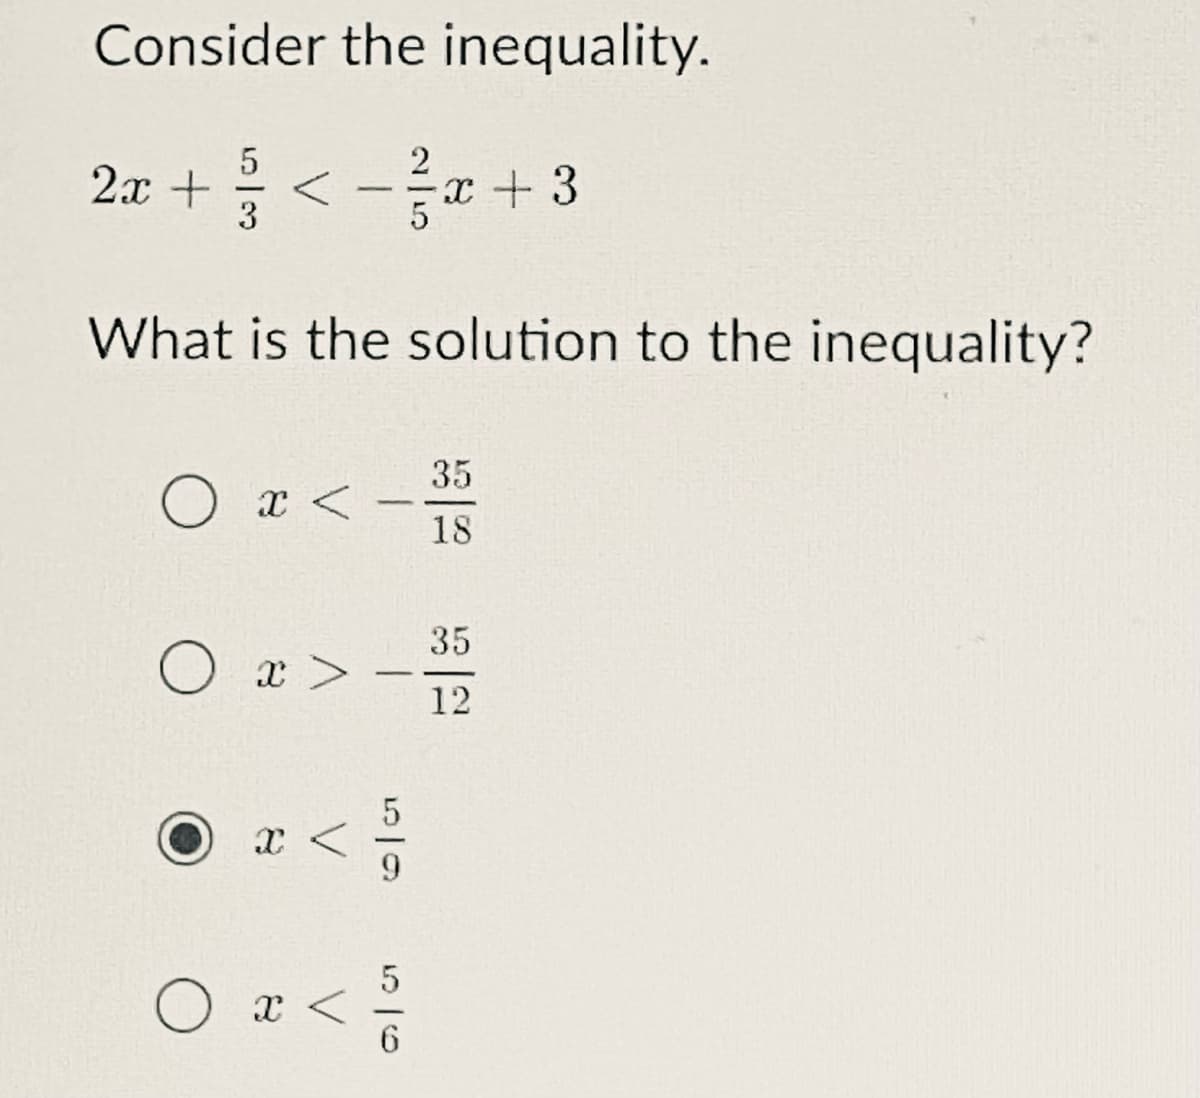 Consider the inequality.
2x + < -x + 3
3
What is the solution to the inequality?
35
O x <
--
18
35
O x >
12
O x <
6.
